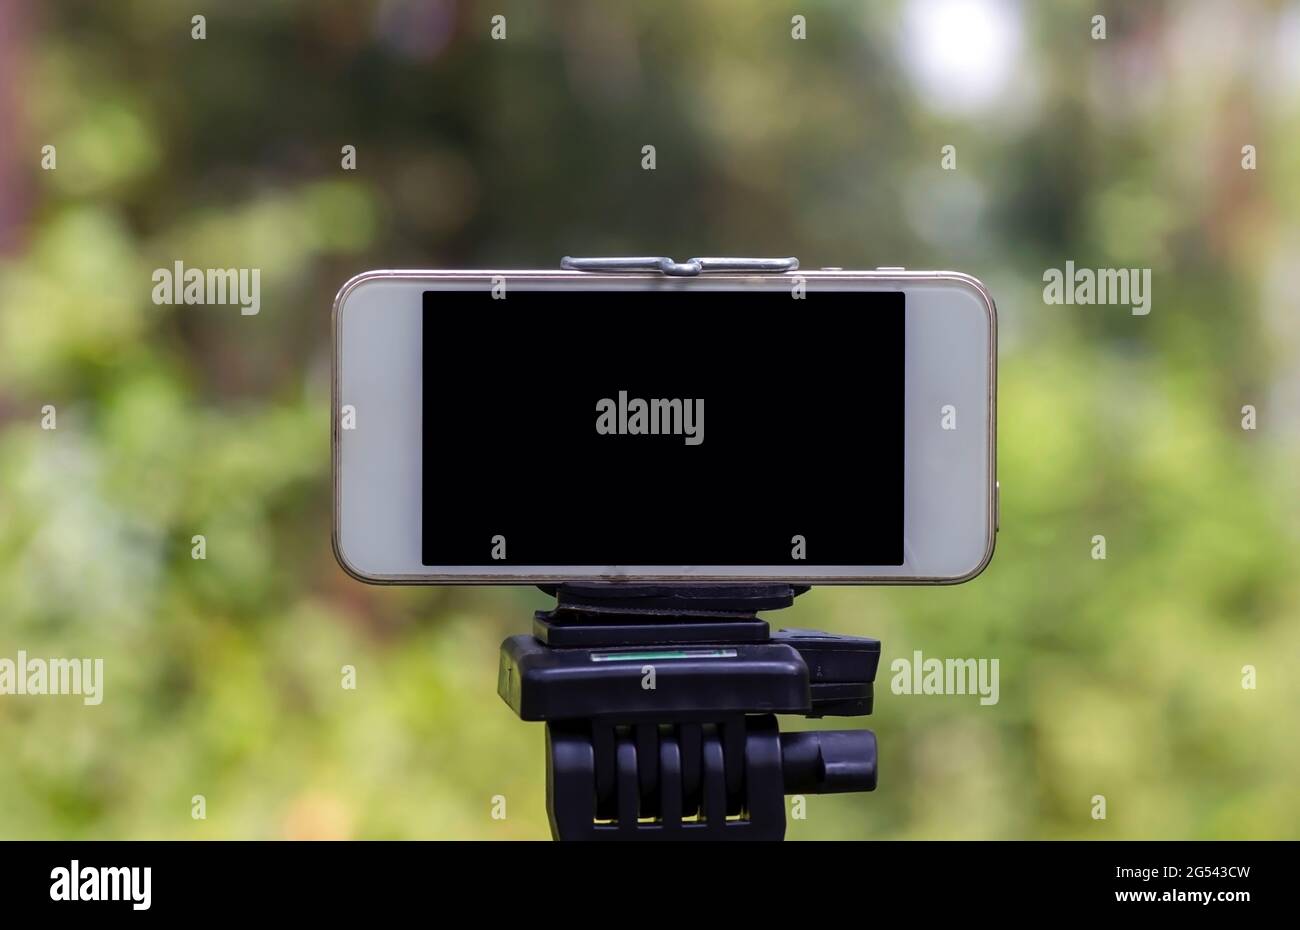 A mobile phone mounted on a tripod capturing image of natural forest in Wonogiri, Indonesia. Stock Photo